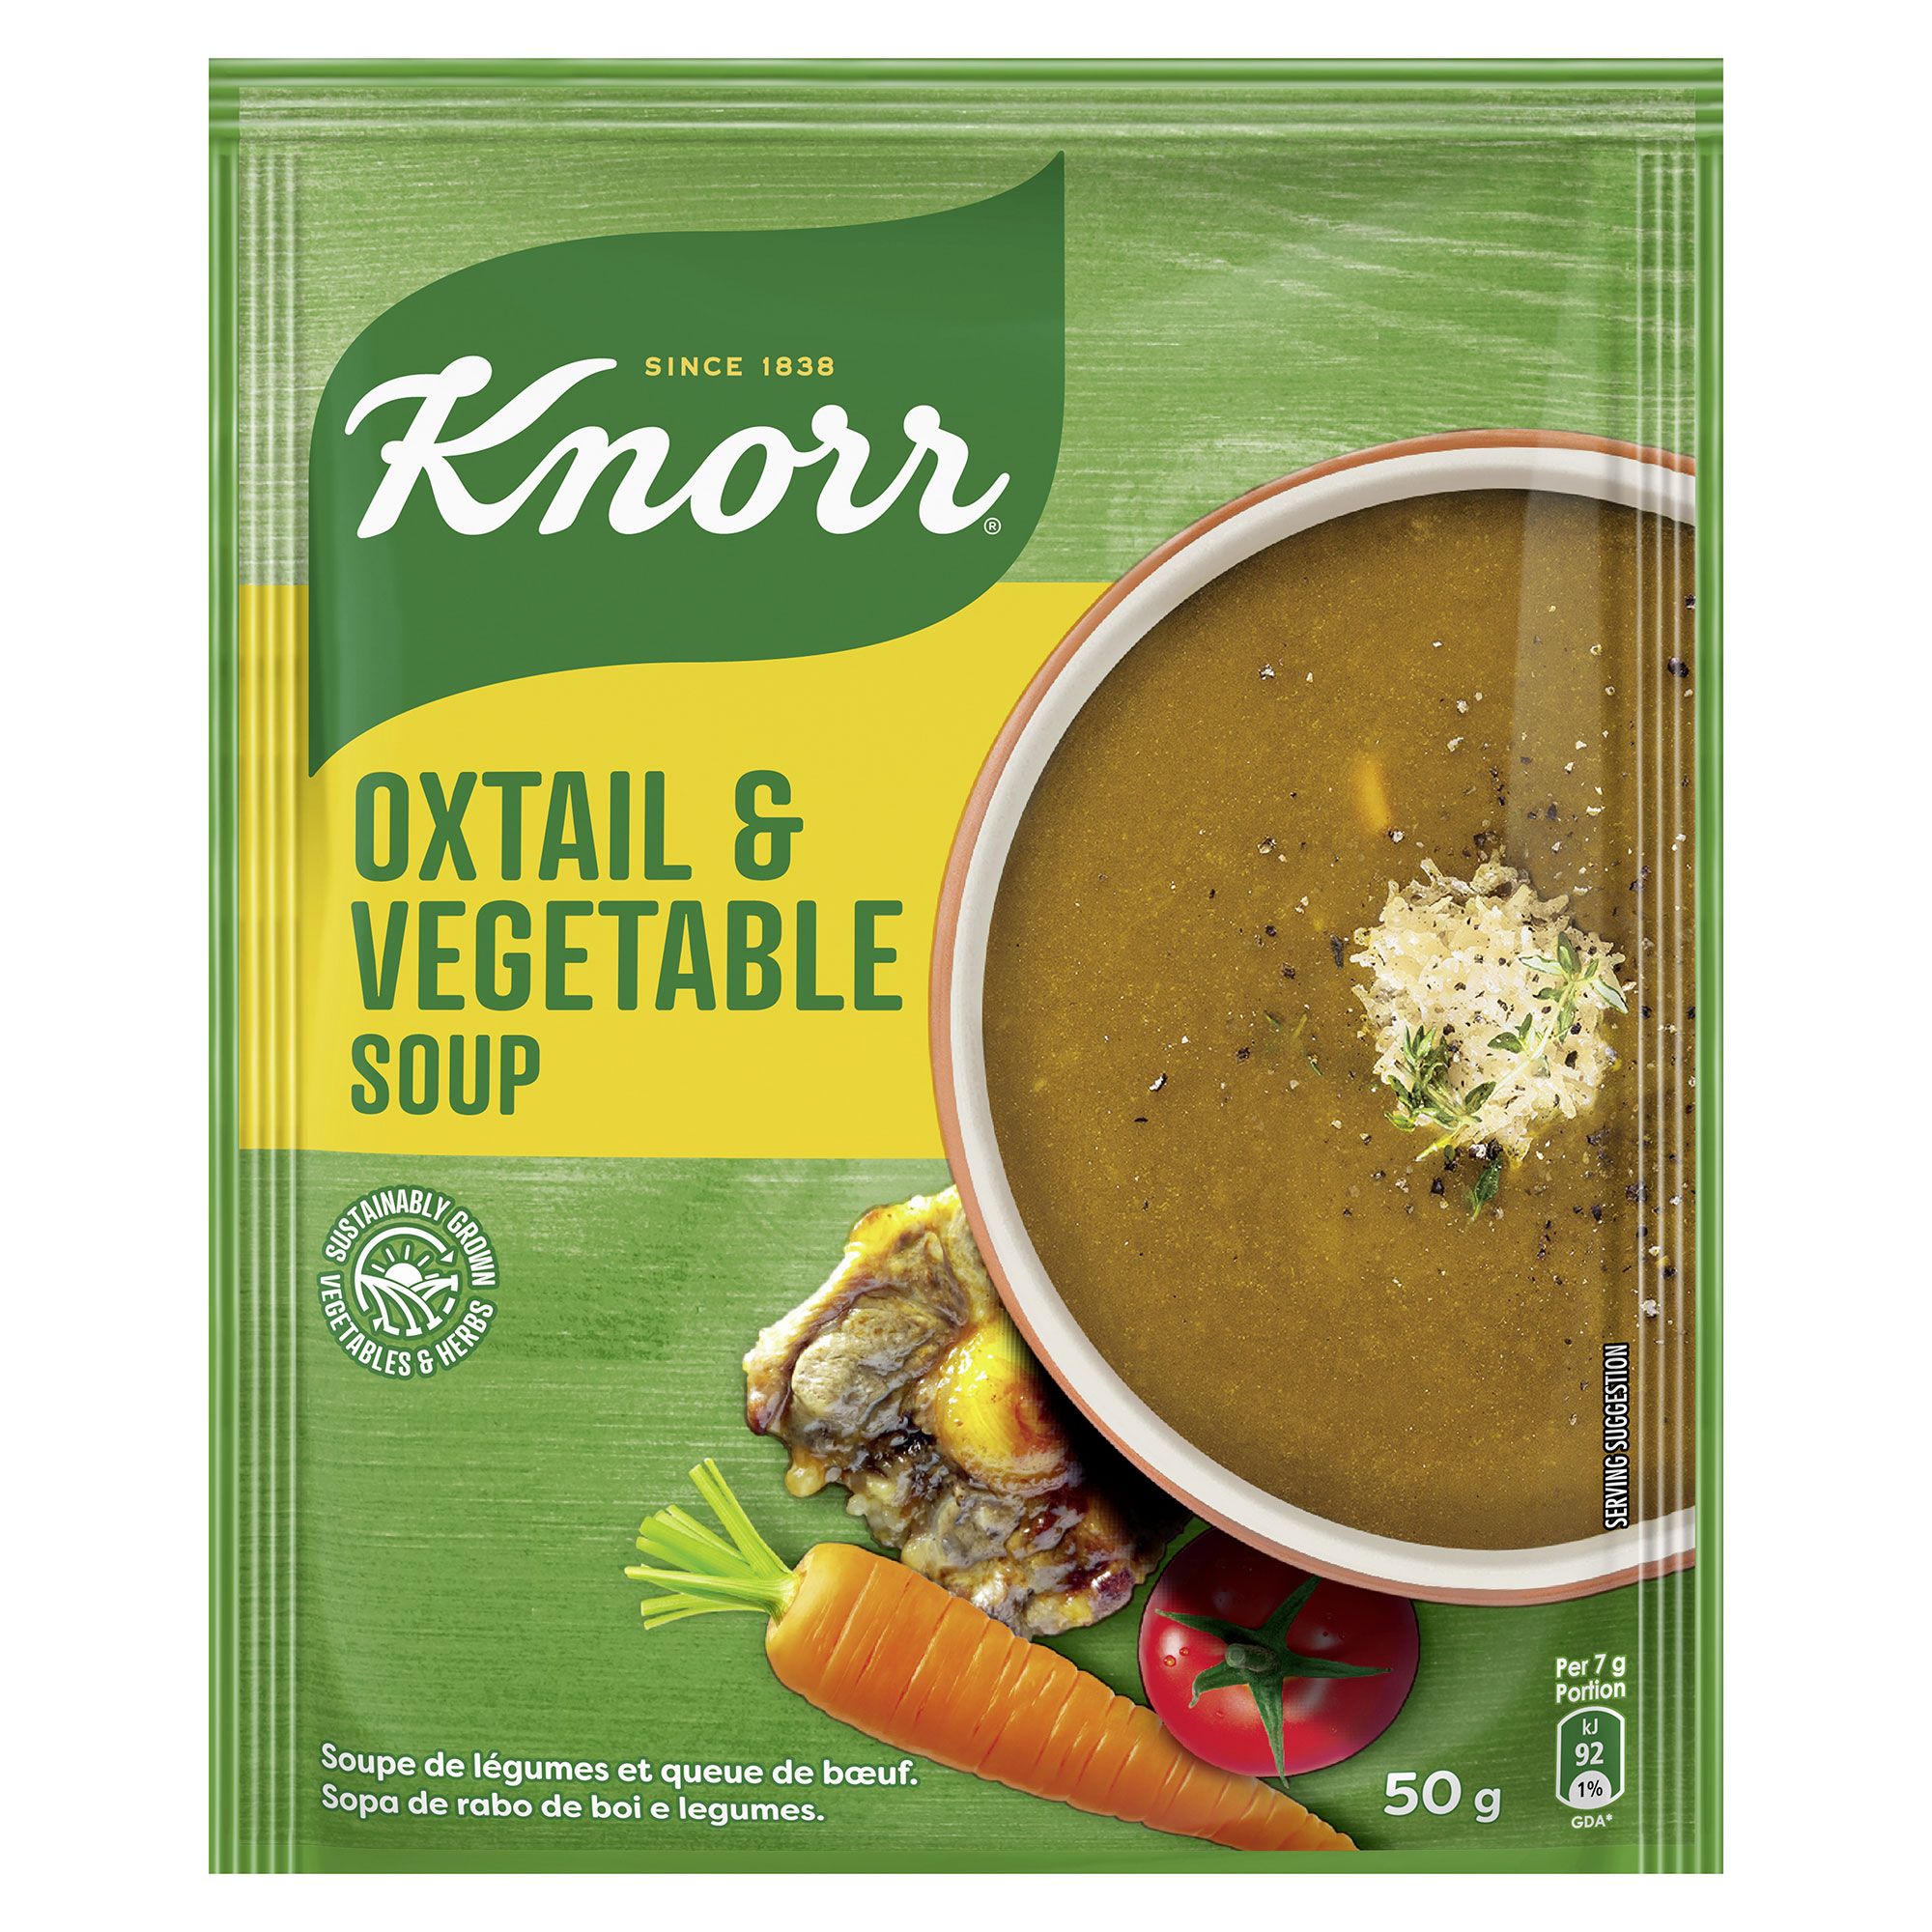 Knorr Oxtail & Vegetable Soup